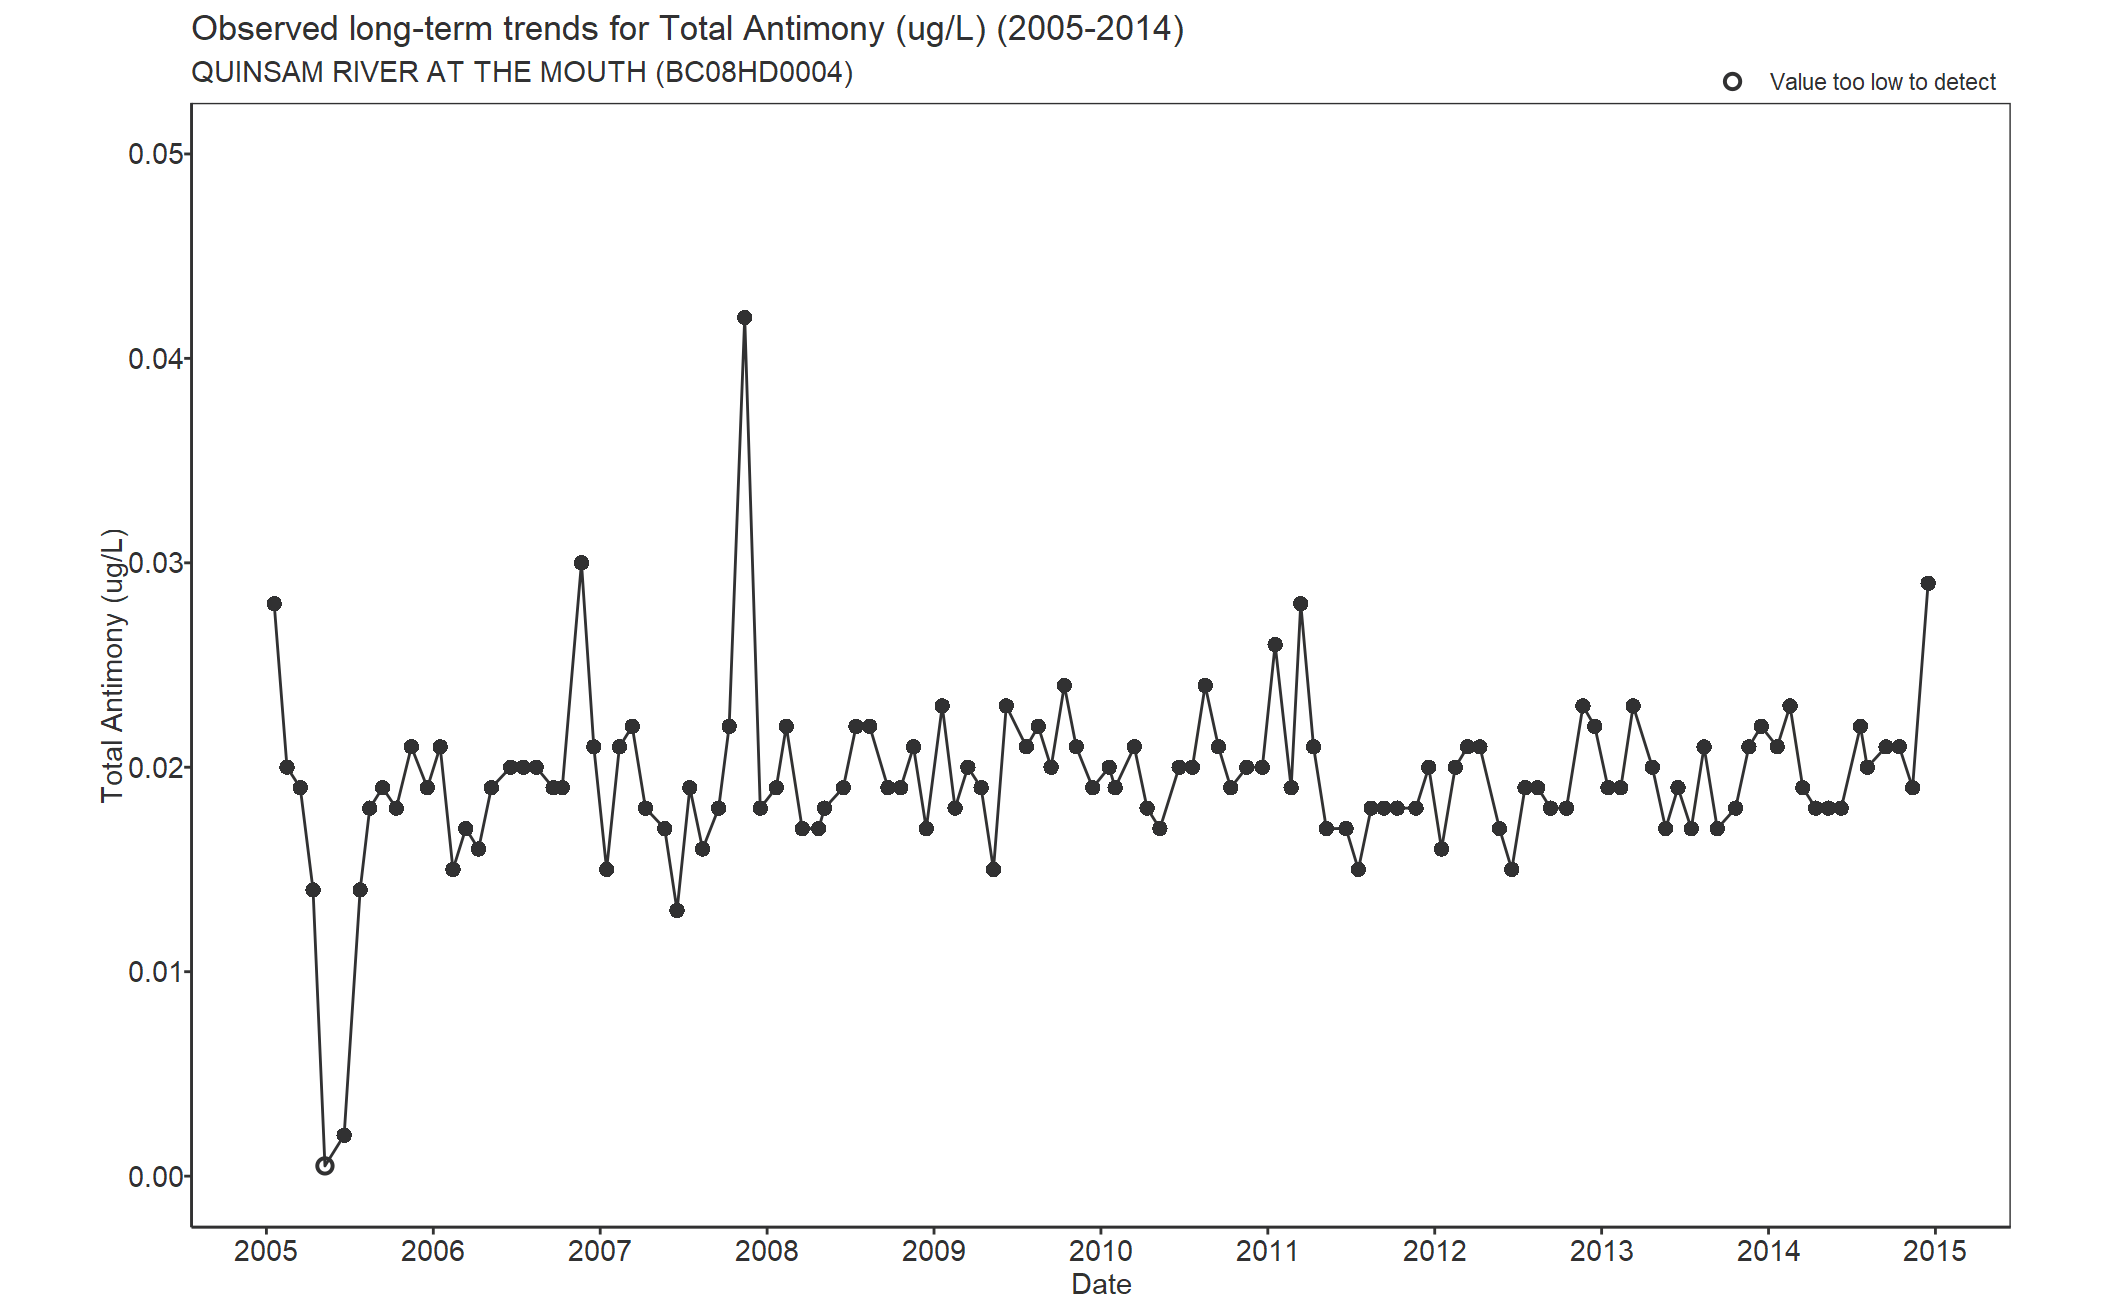 Observed long-term trends for Total Antimony (2005-2014)